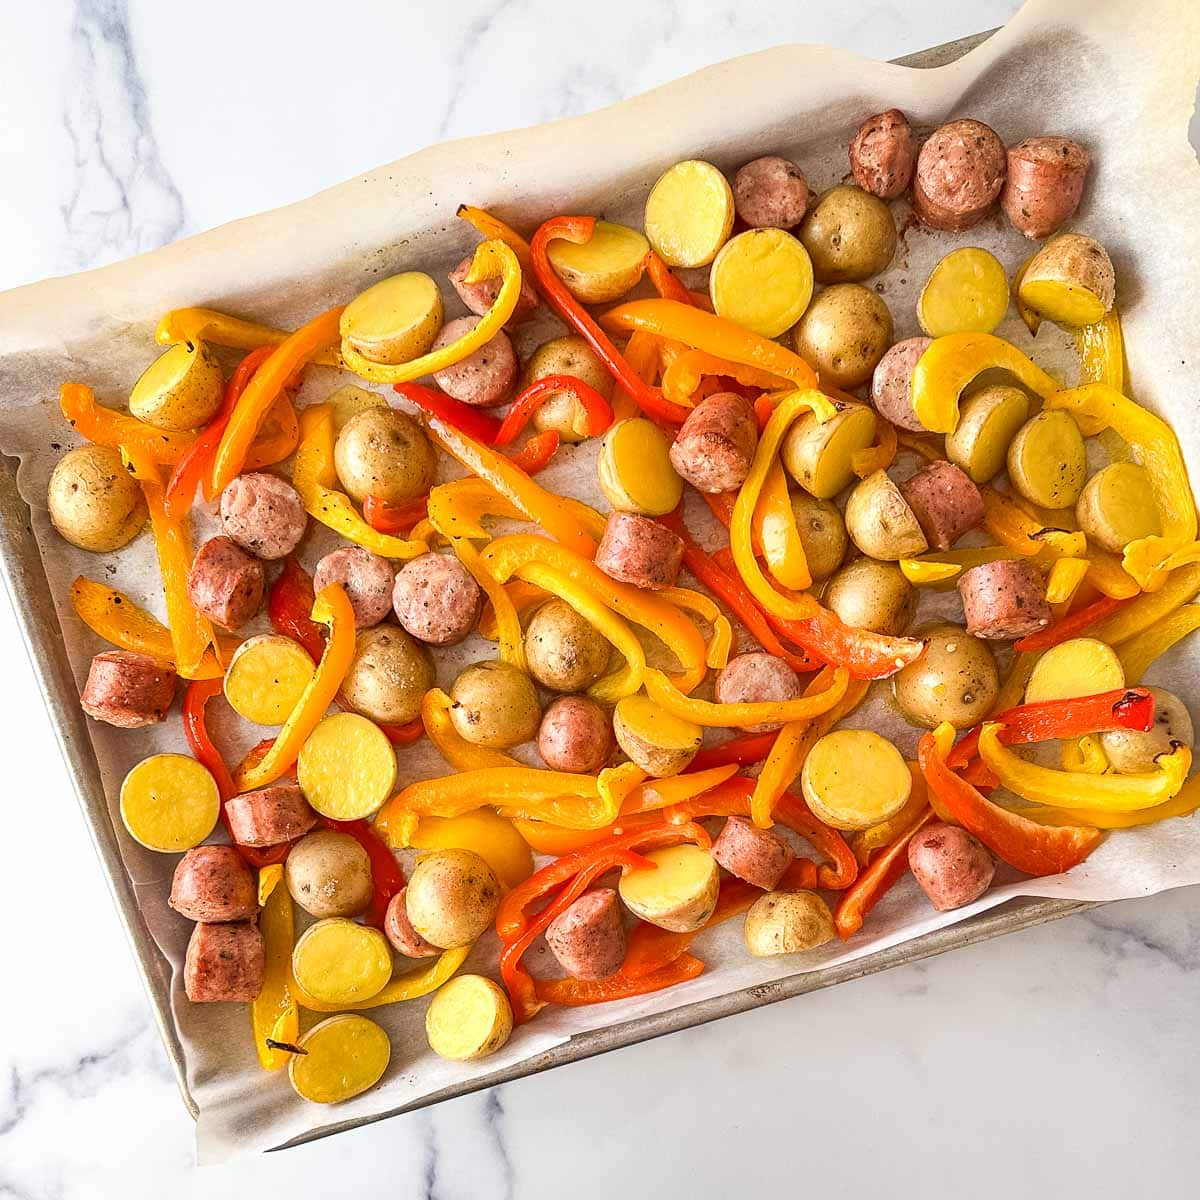 A baking sheet filled with roasted vegetables, potatoes and chicken sausages.